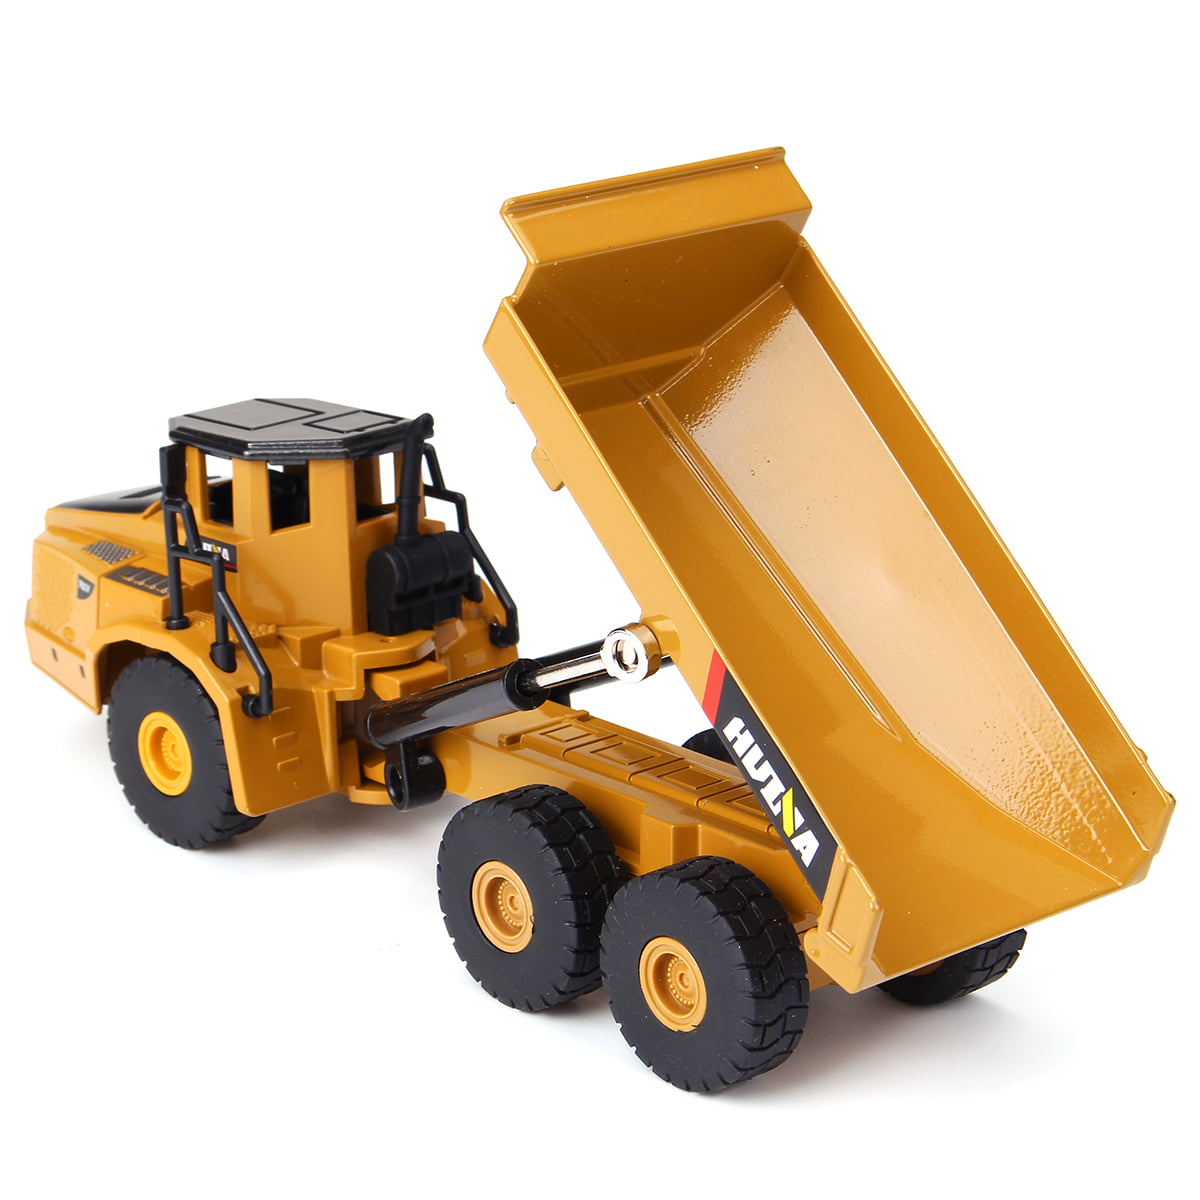 1:50 Kids Toy Construction Trucks Alloy Digger Excavator Toys Xmas Gift Kid Toy